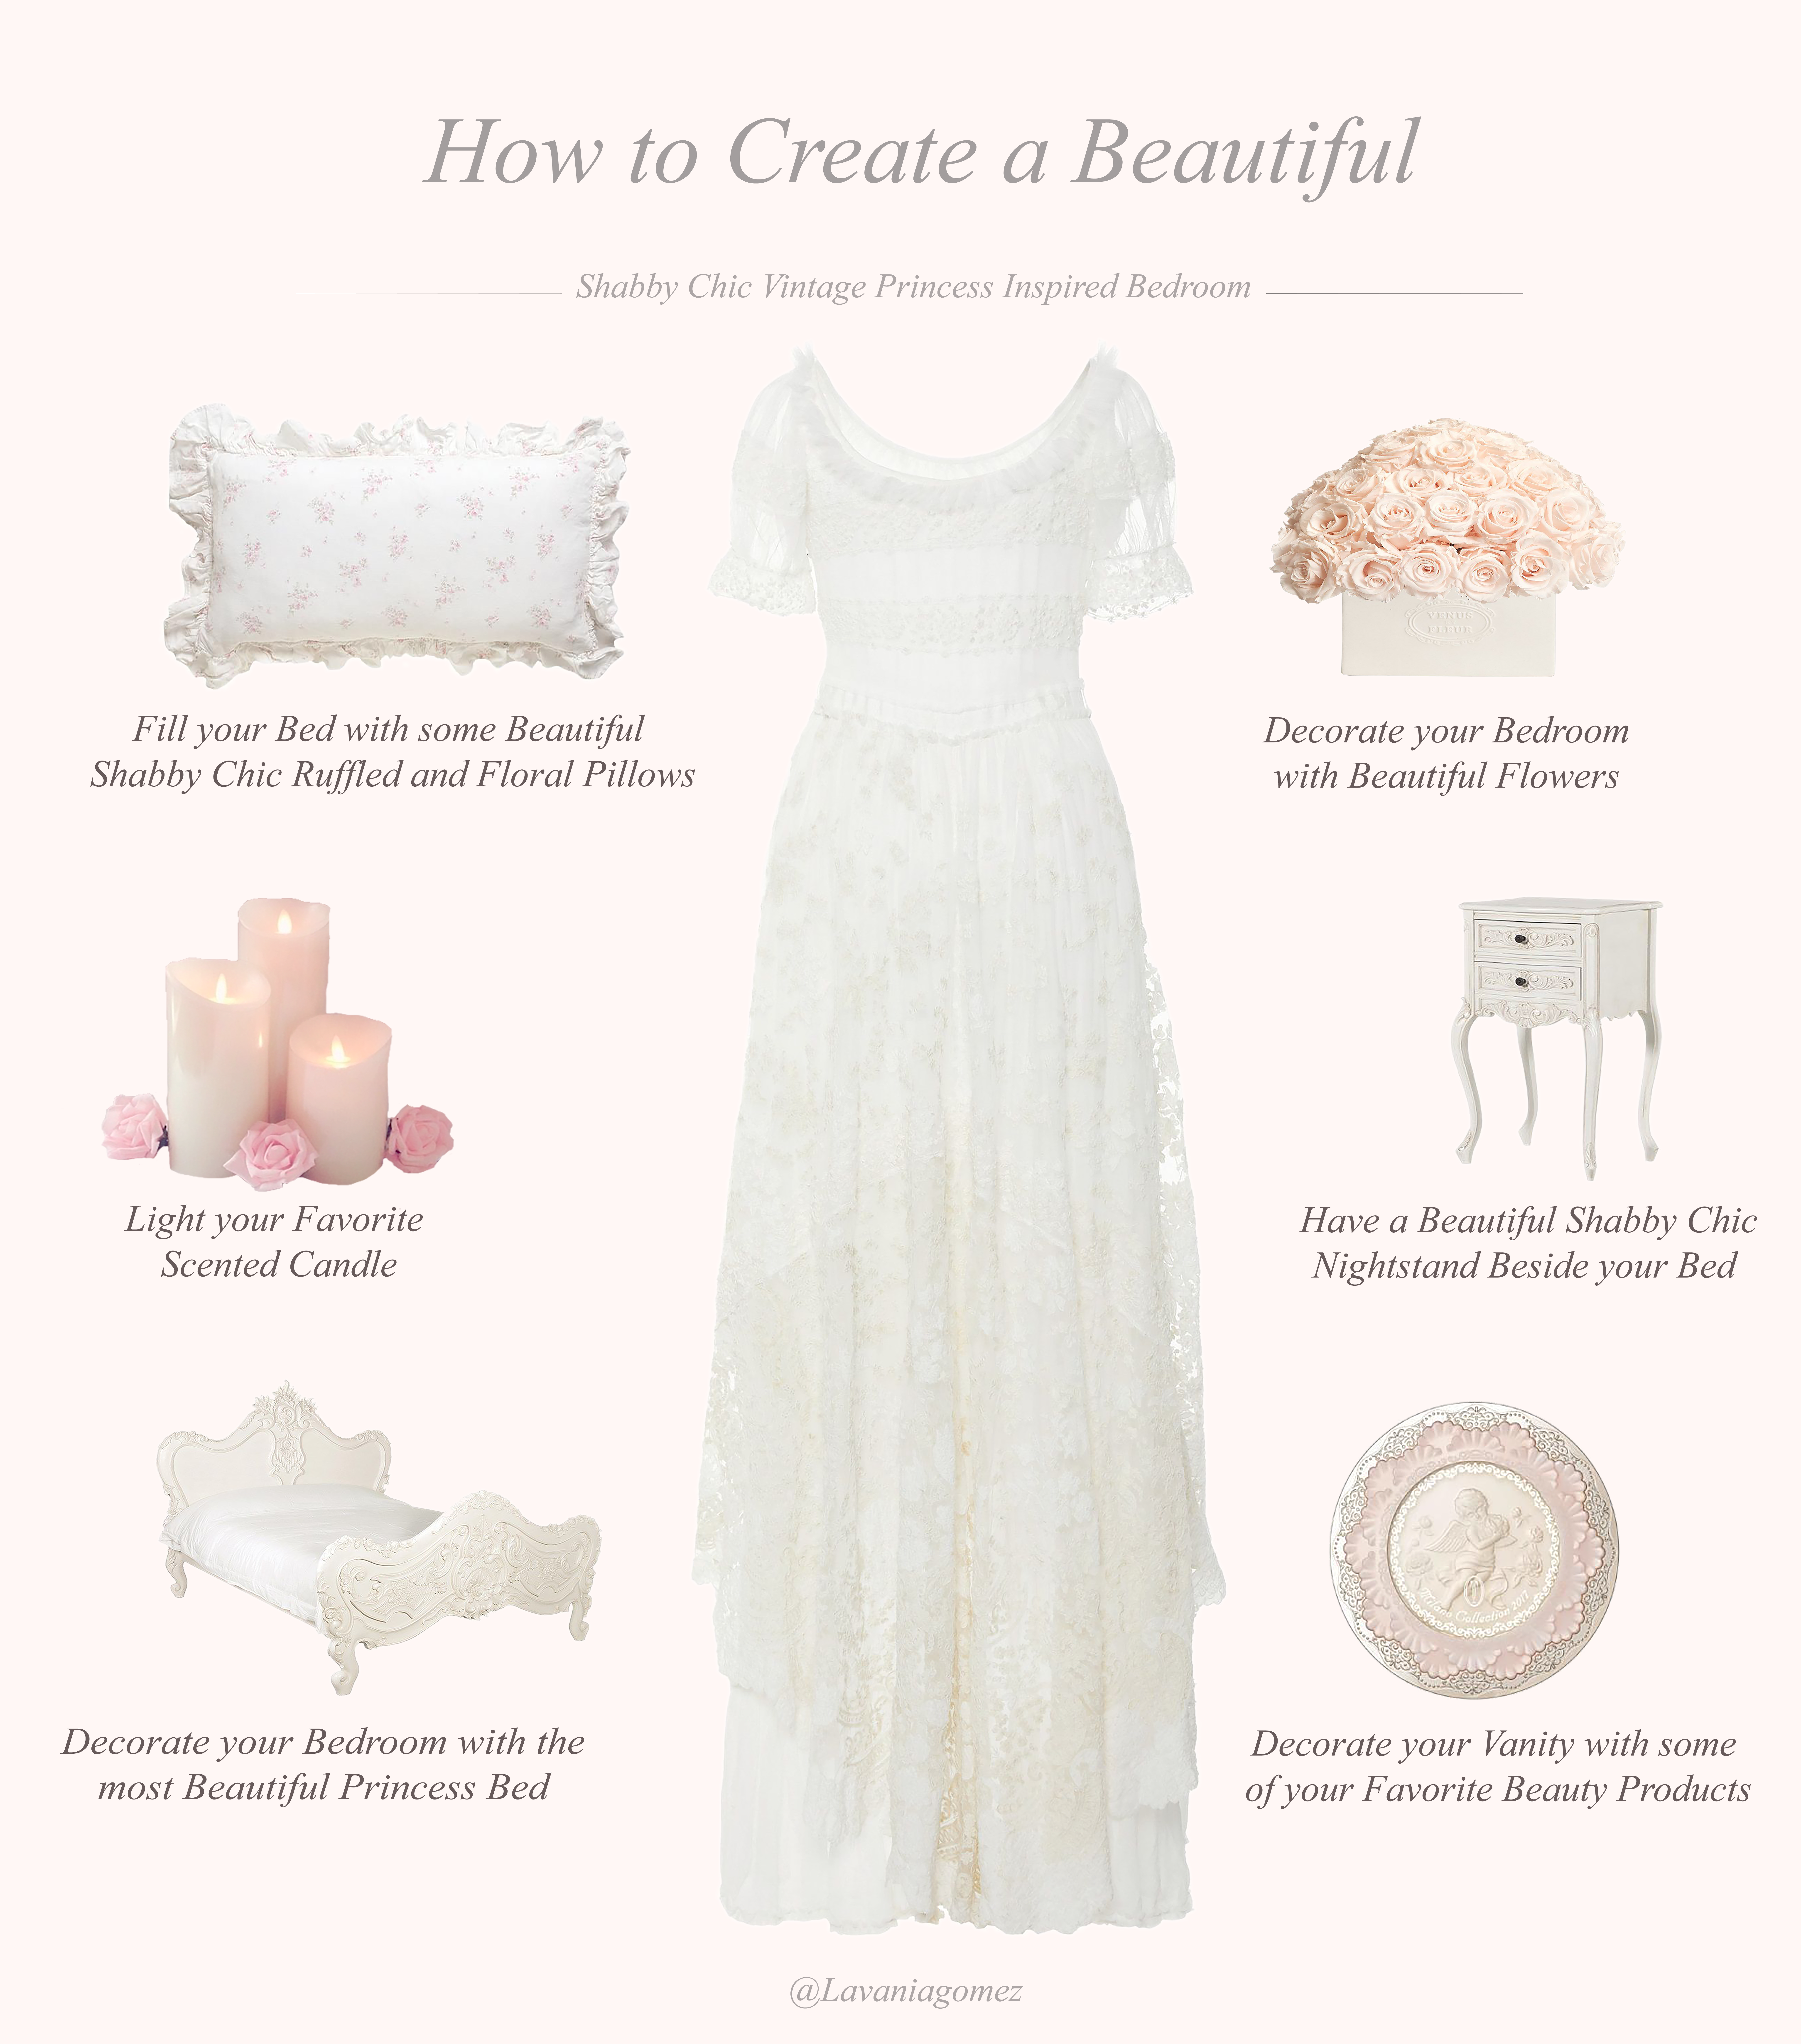 HOW TO CREATE A BEAUTIFUL SHABBY CHIC PRINCESS INSPIRED BEDROOM MAKE UP